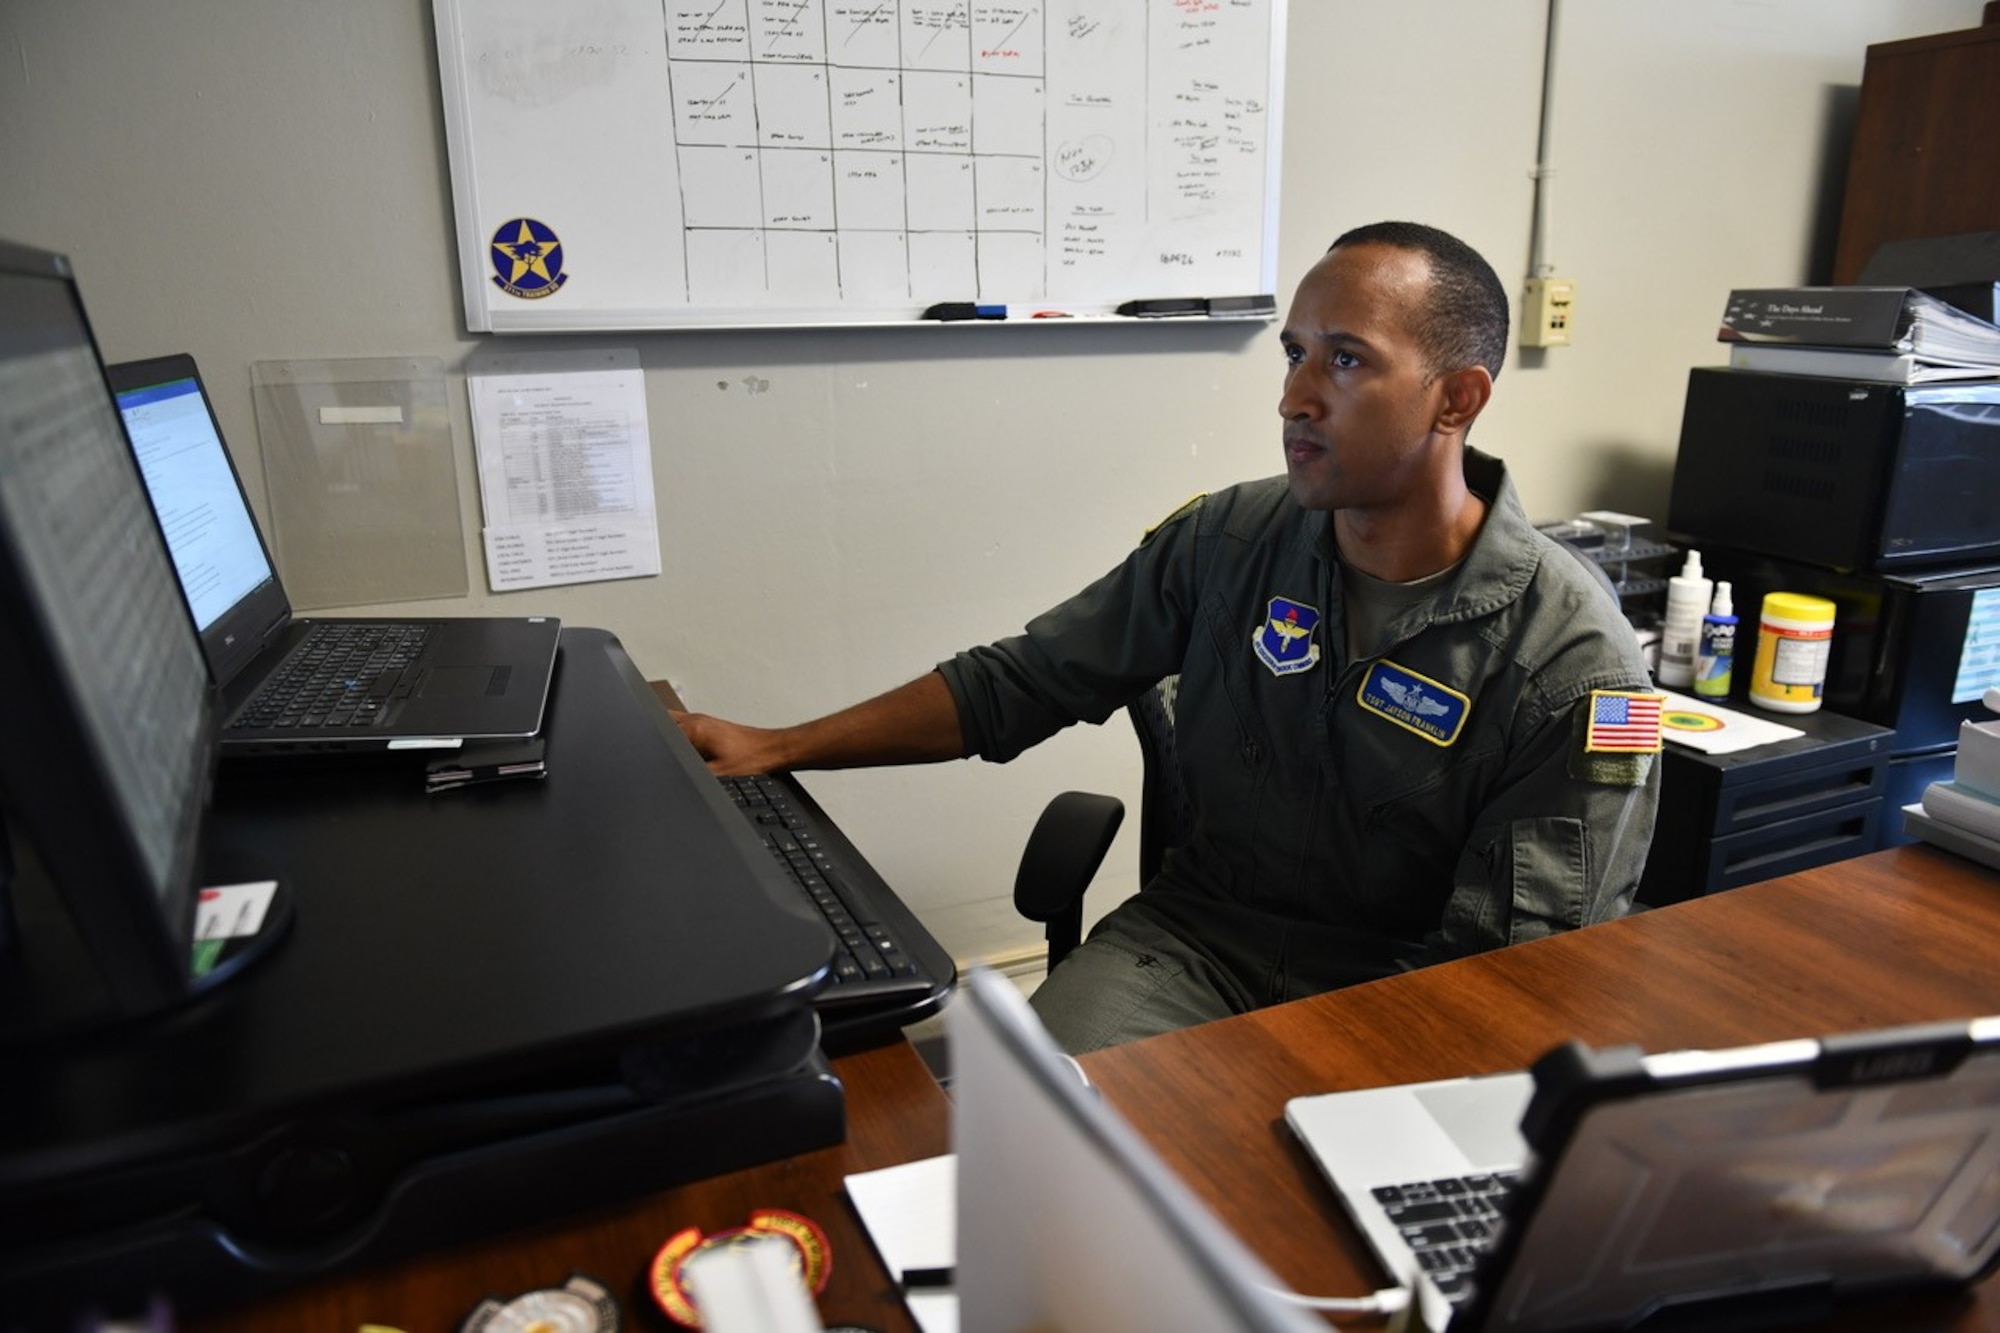 U.S. Air Force Tech. Sgt. Jayson Franklin, 311th Training Squadron Arabic academic training advisor, works at his desk in his squadron building at Presidio of Monterey, Calif., July 20, 2022. In addition to his advisor duties, Franklin hosts study halls, tutors students, and manages the unit fitness program. (U.S. Air Force photo by Leonardo Carrillo)